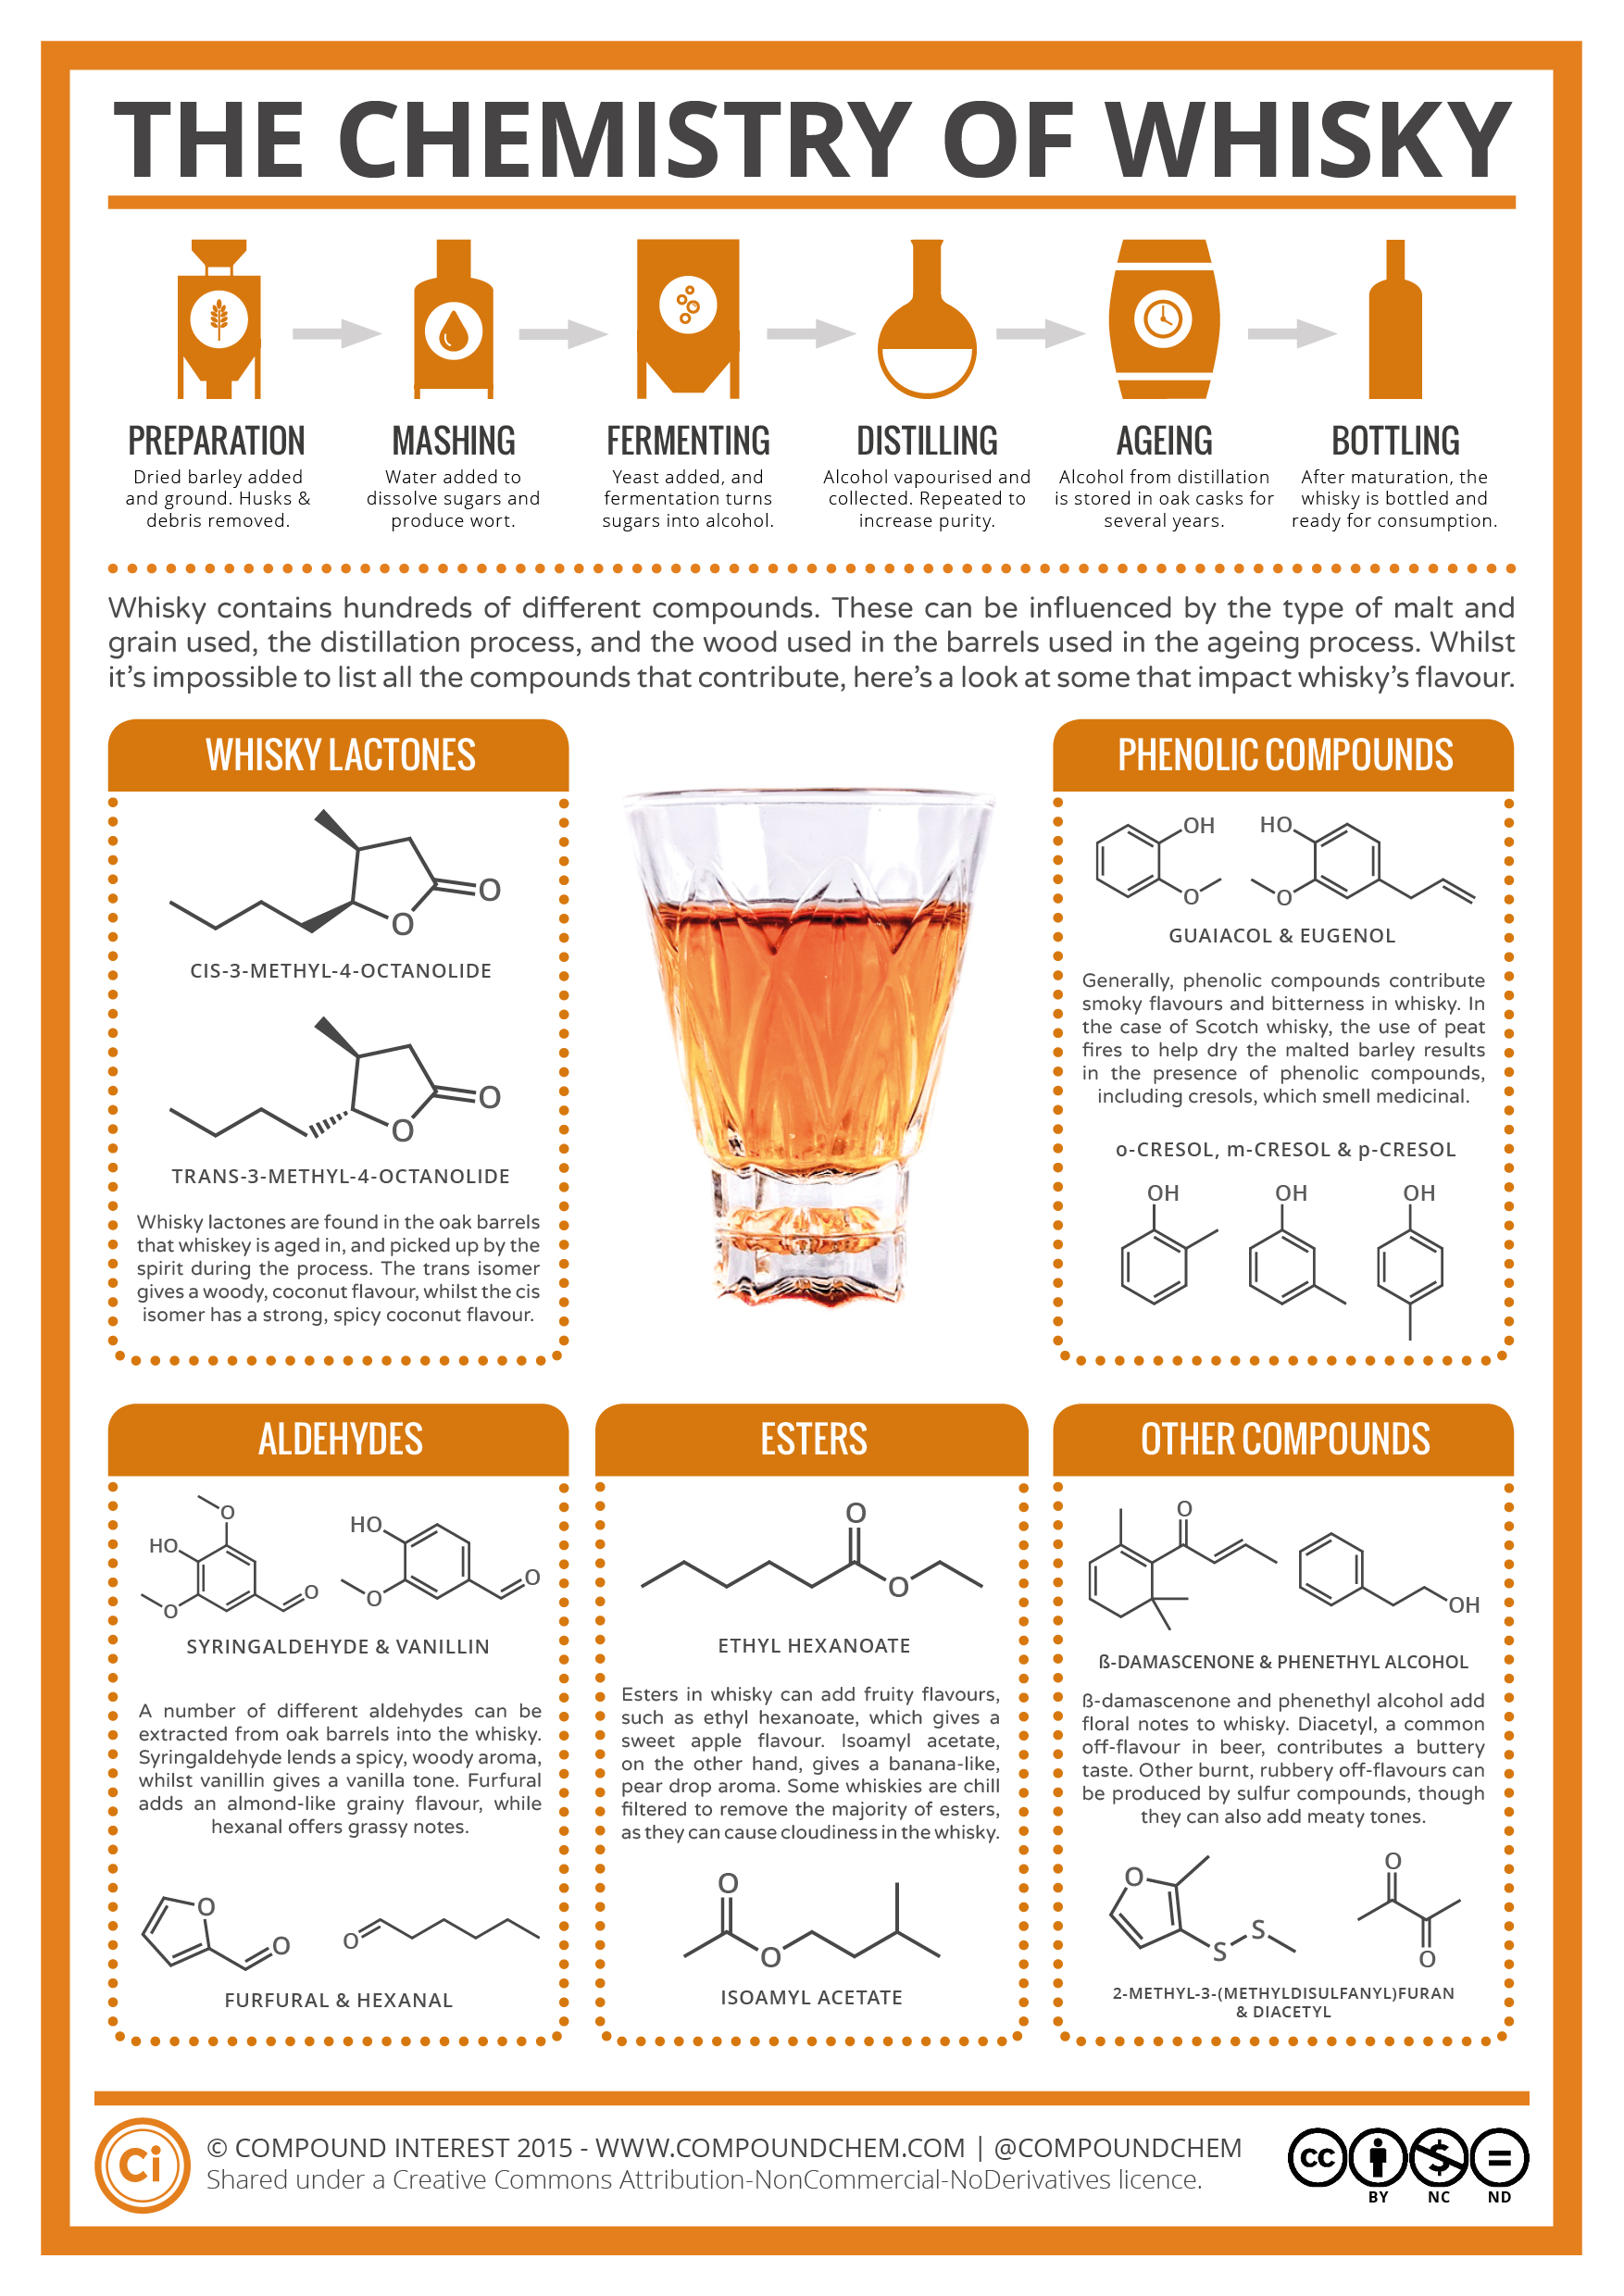 The Chemistry Make Up of Whisky